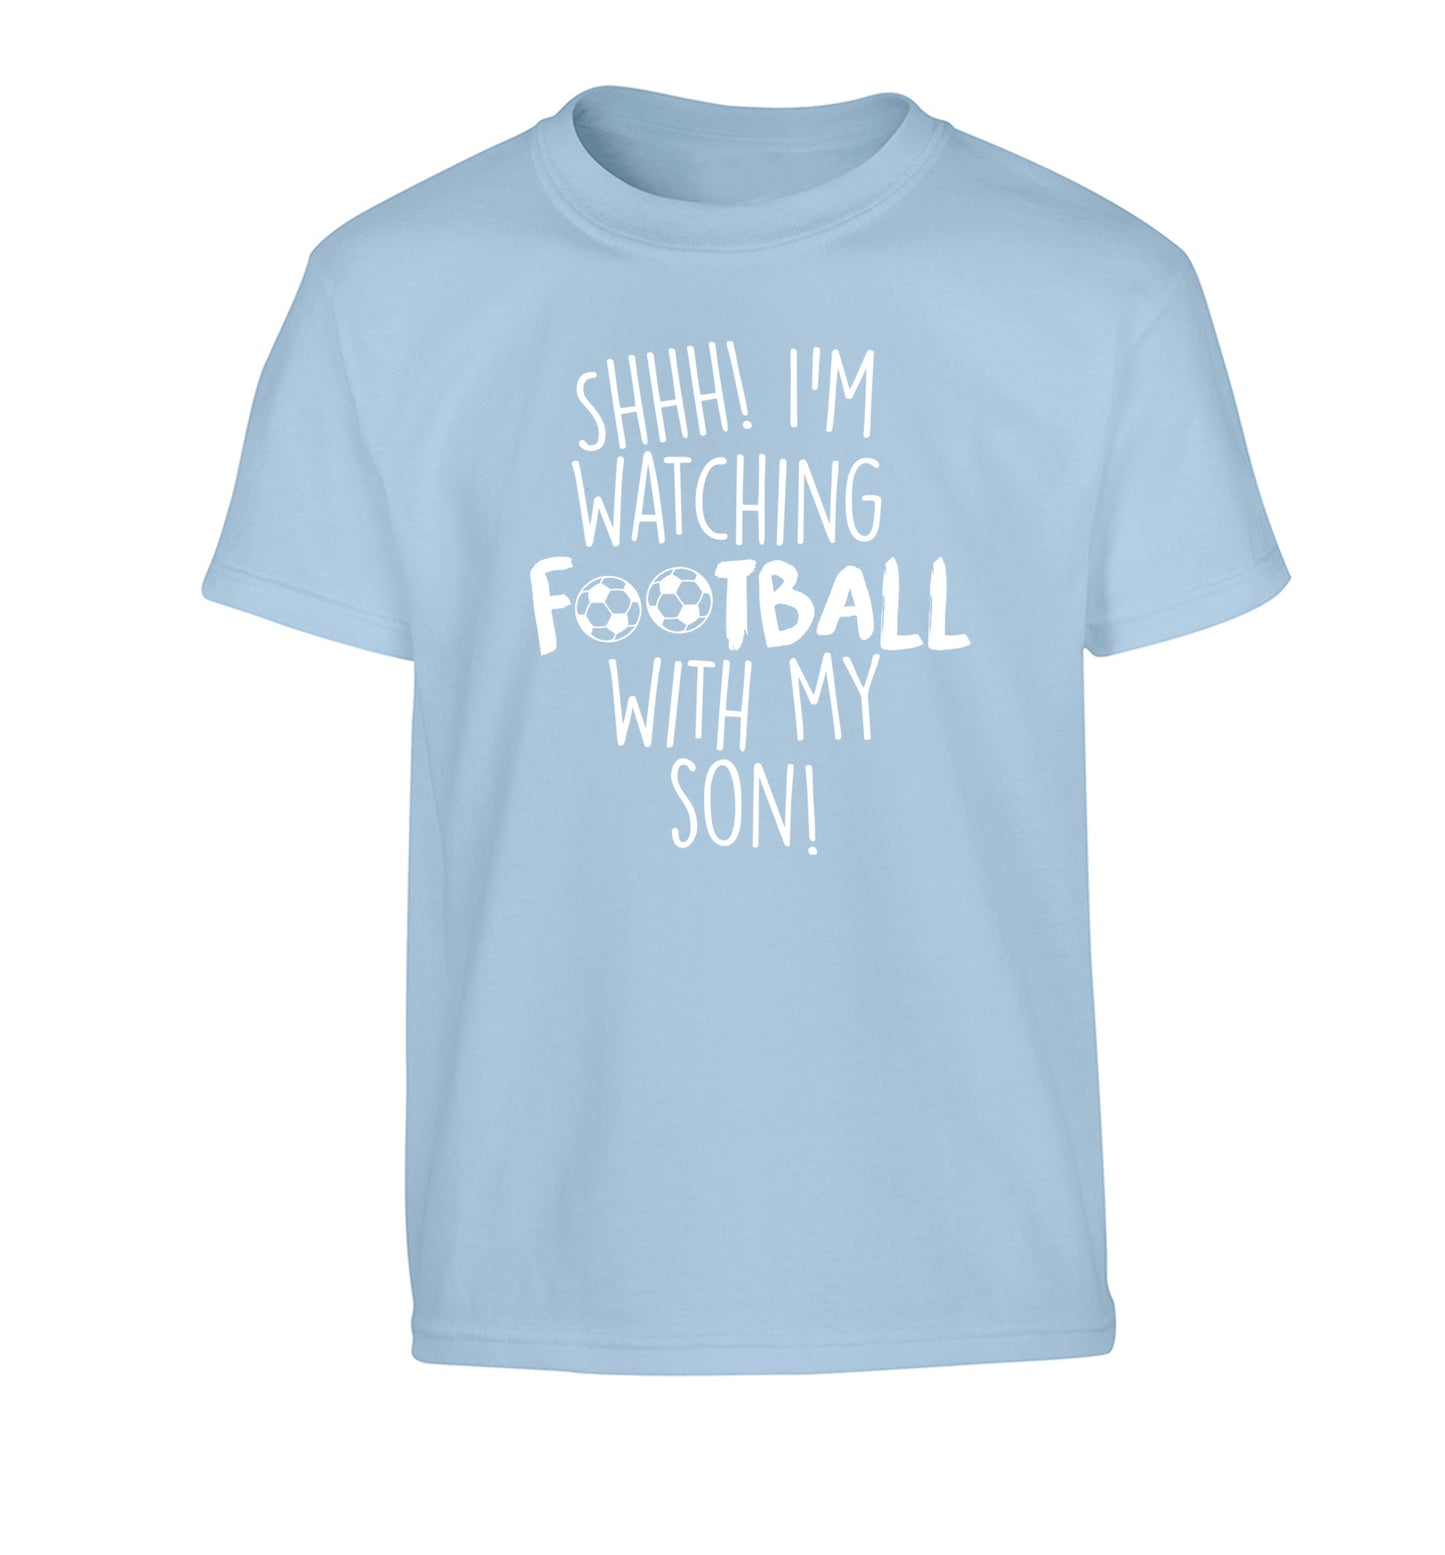 Shhh I'm watching football with my son Children's light blue Tshirt 12-14 Years